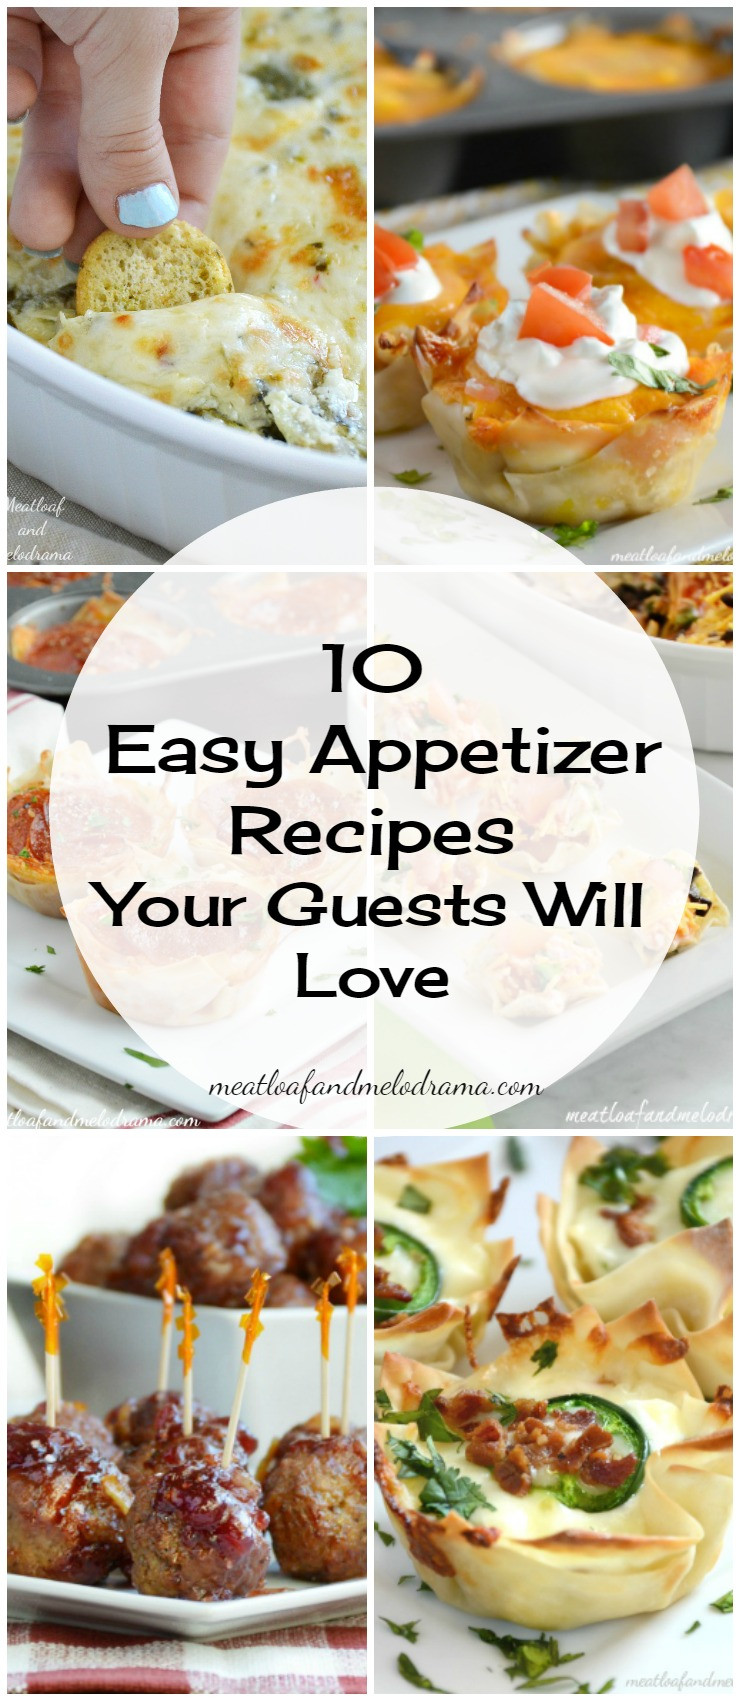 Quick And Easy Appetizers Recipe
 10 Easy Appetizer Recipes Meatloaf and Melodrama